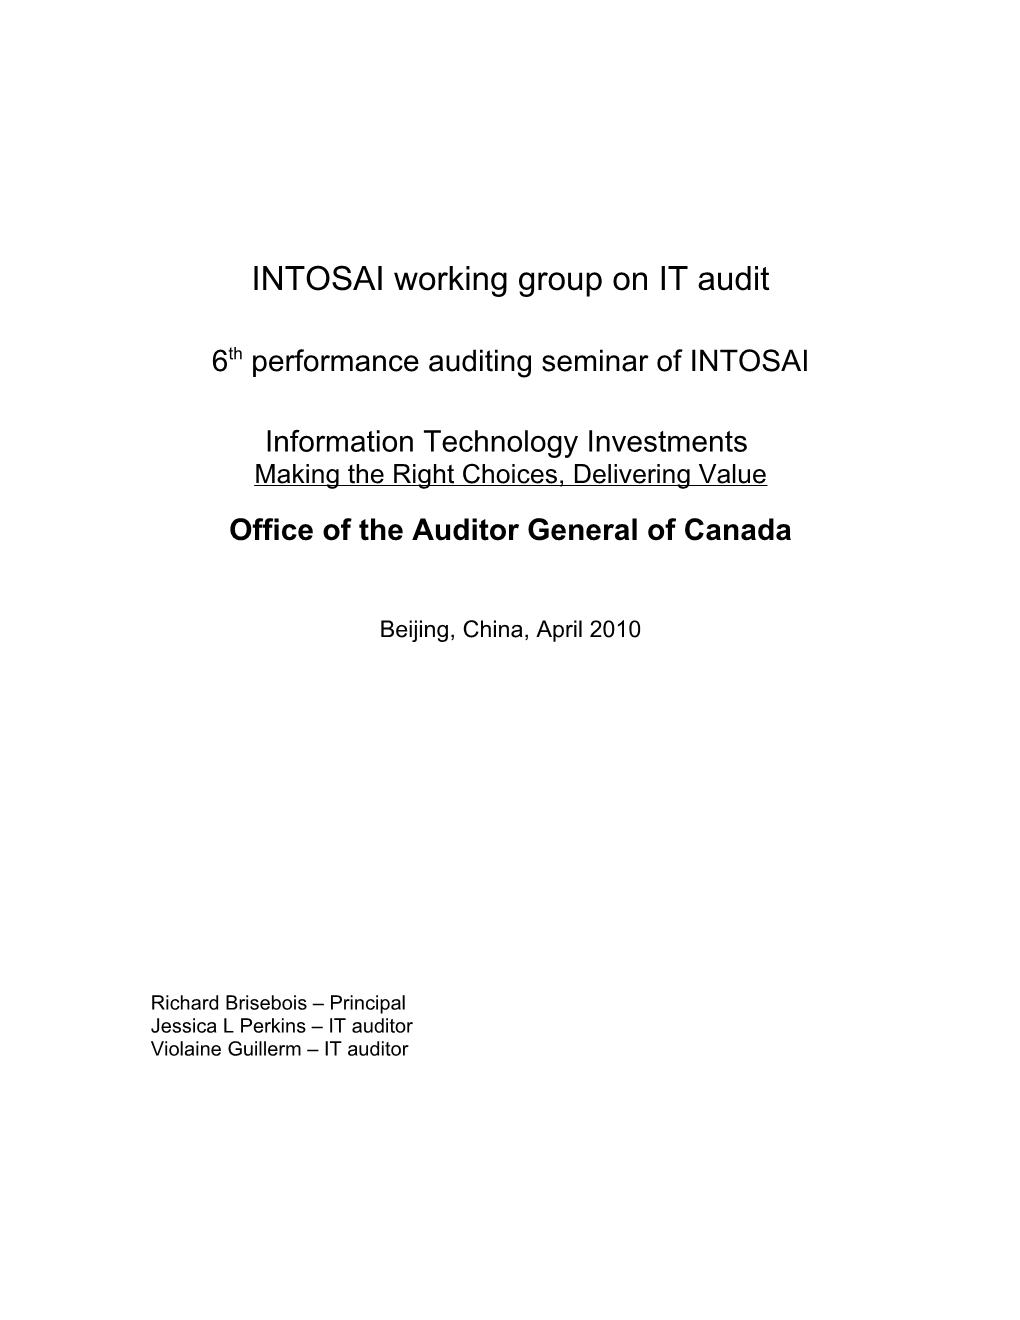 INTOSAI Working Group on IT Audit